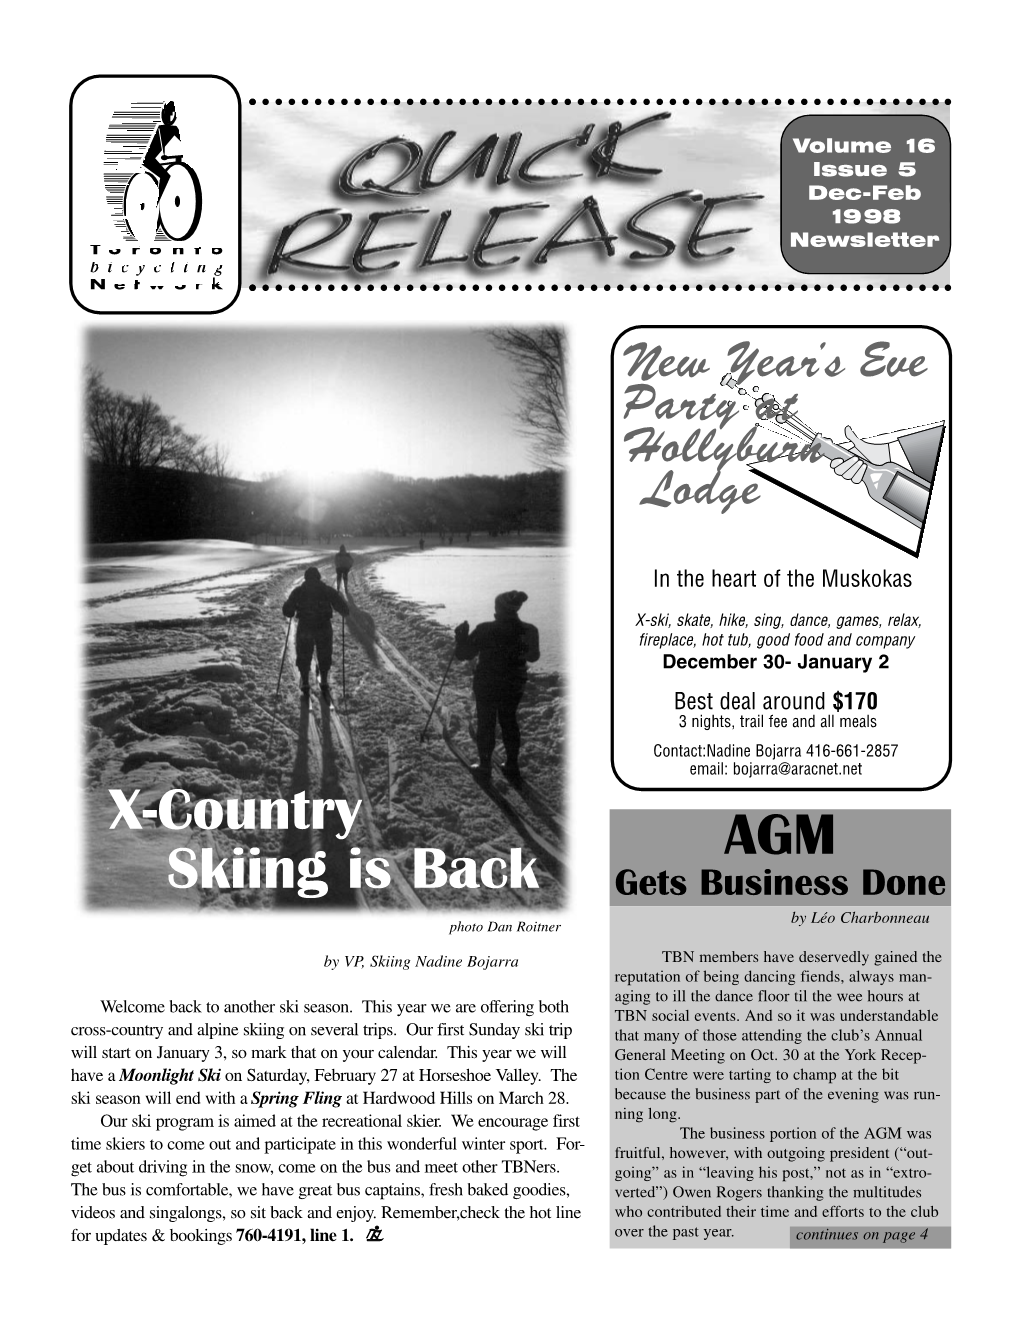 AGM X-Country Skiing Is Back